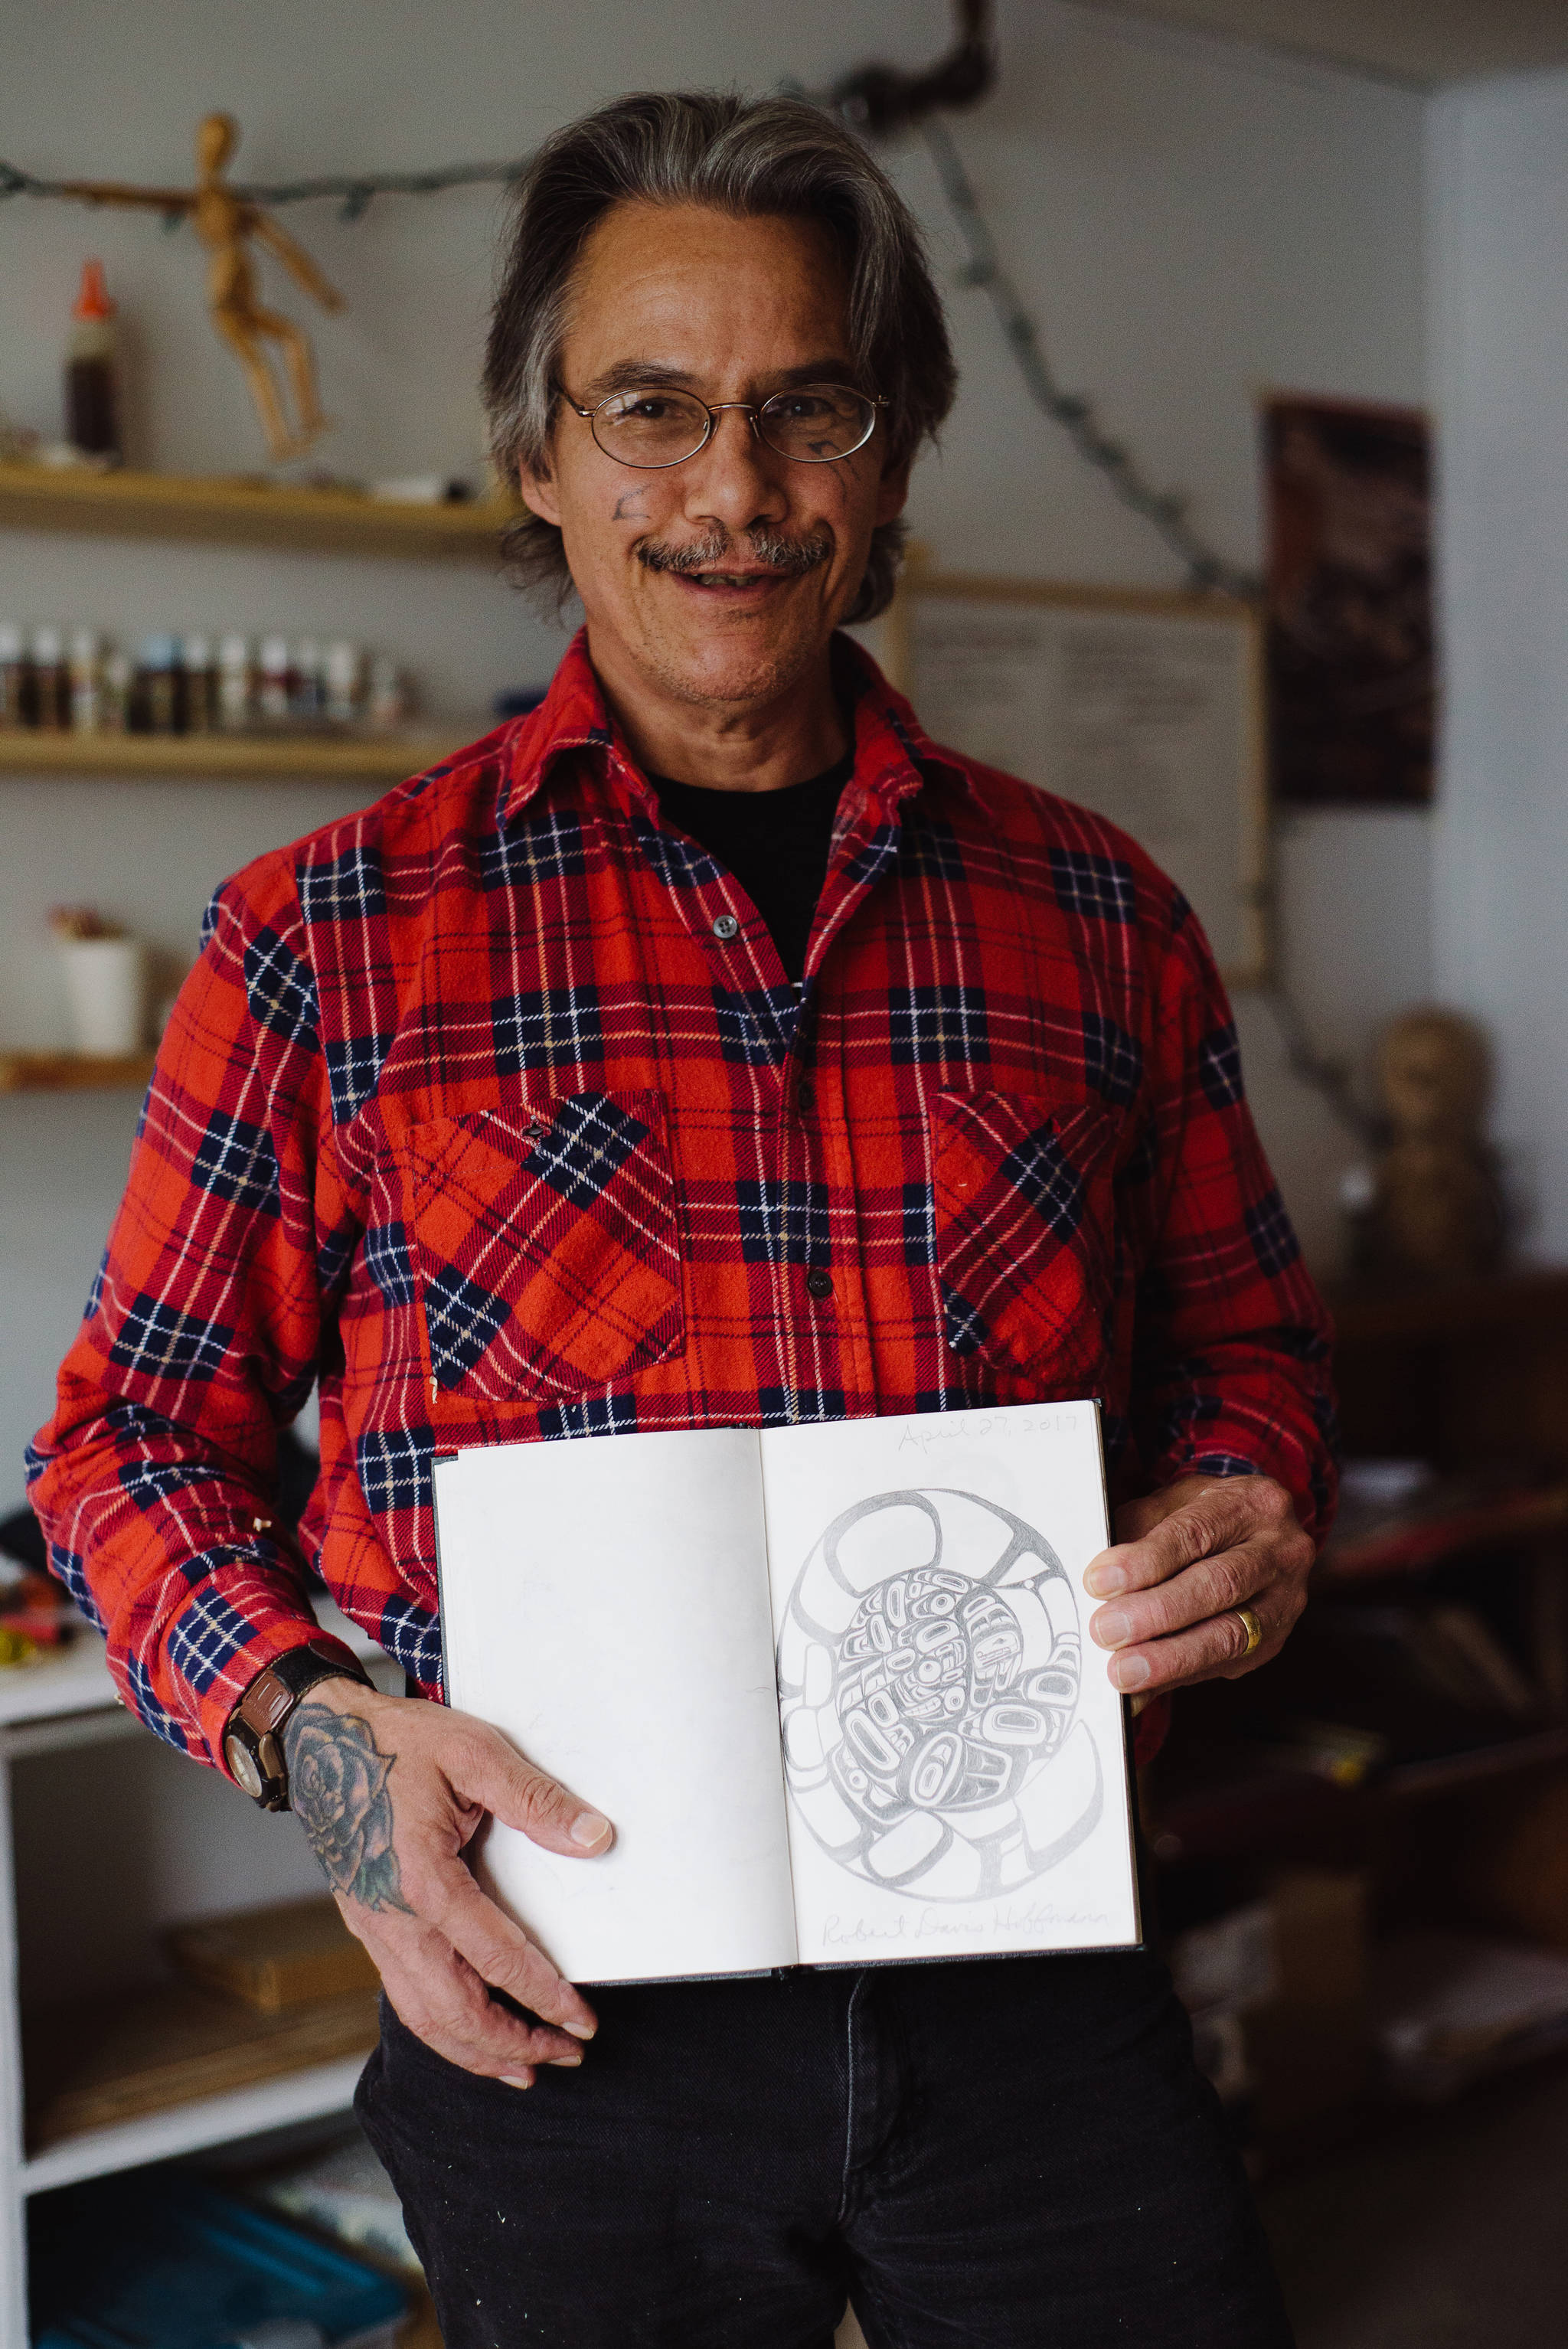 Robert Hoffman with his sketchbook. (Photo by Sarah O’Leary)